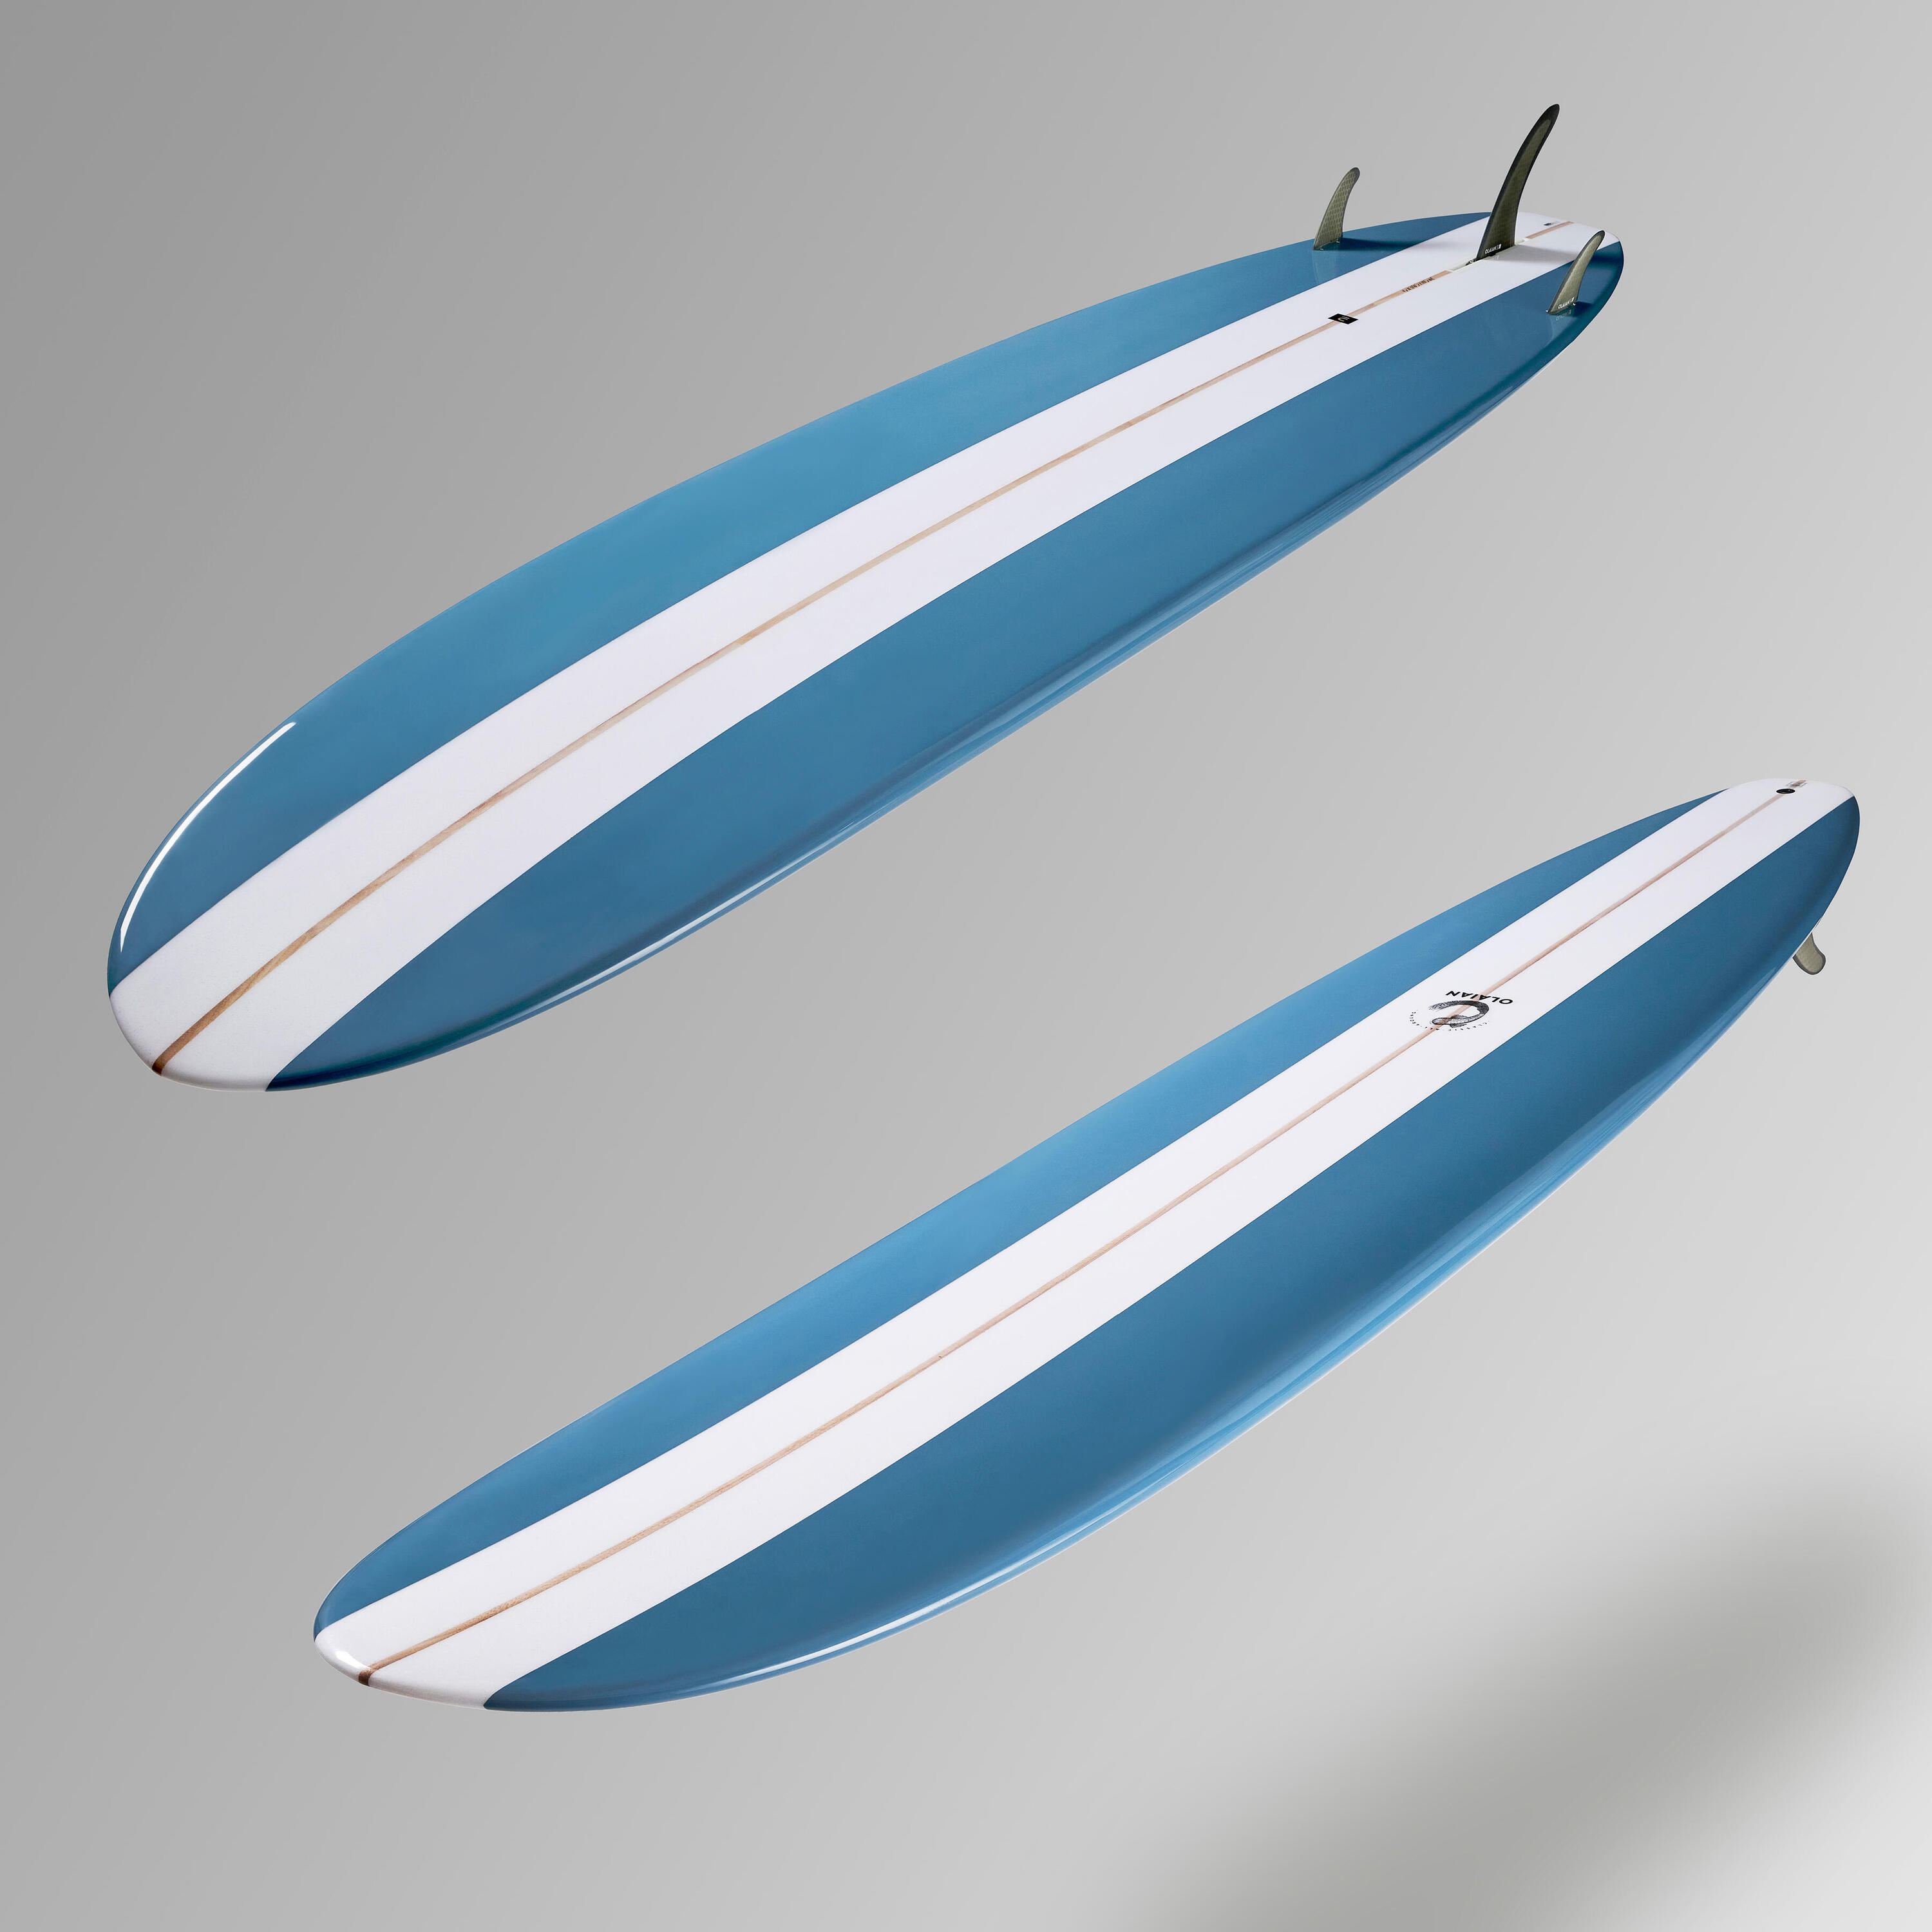 LONGBOARD 900 9' 67 L . Comes with 2+1 set-up 8" central fin. 3/14